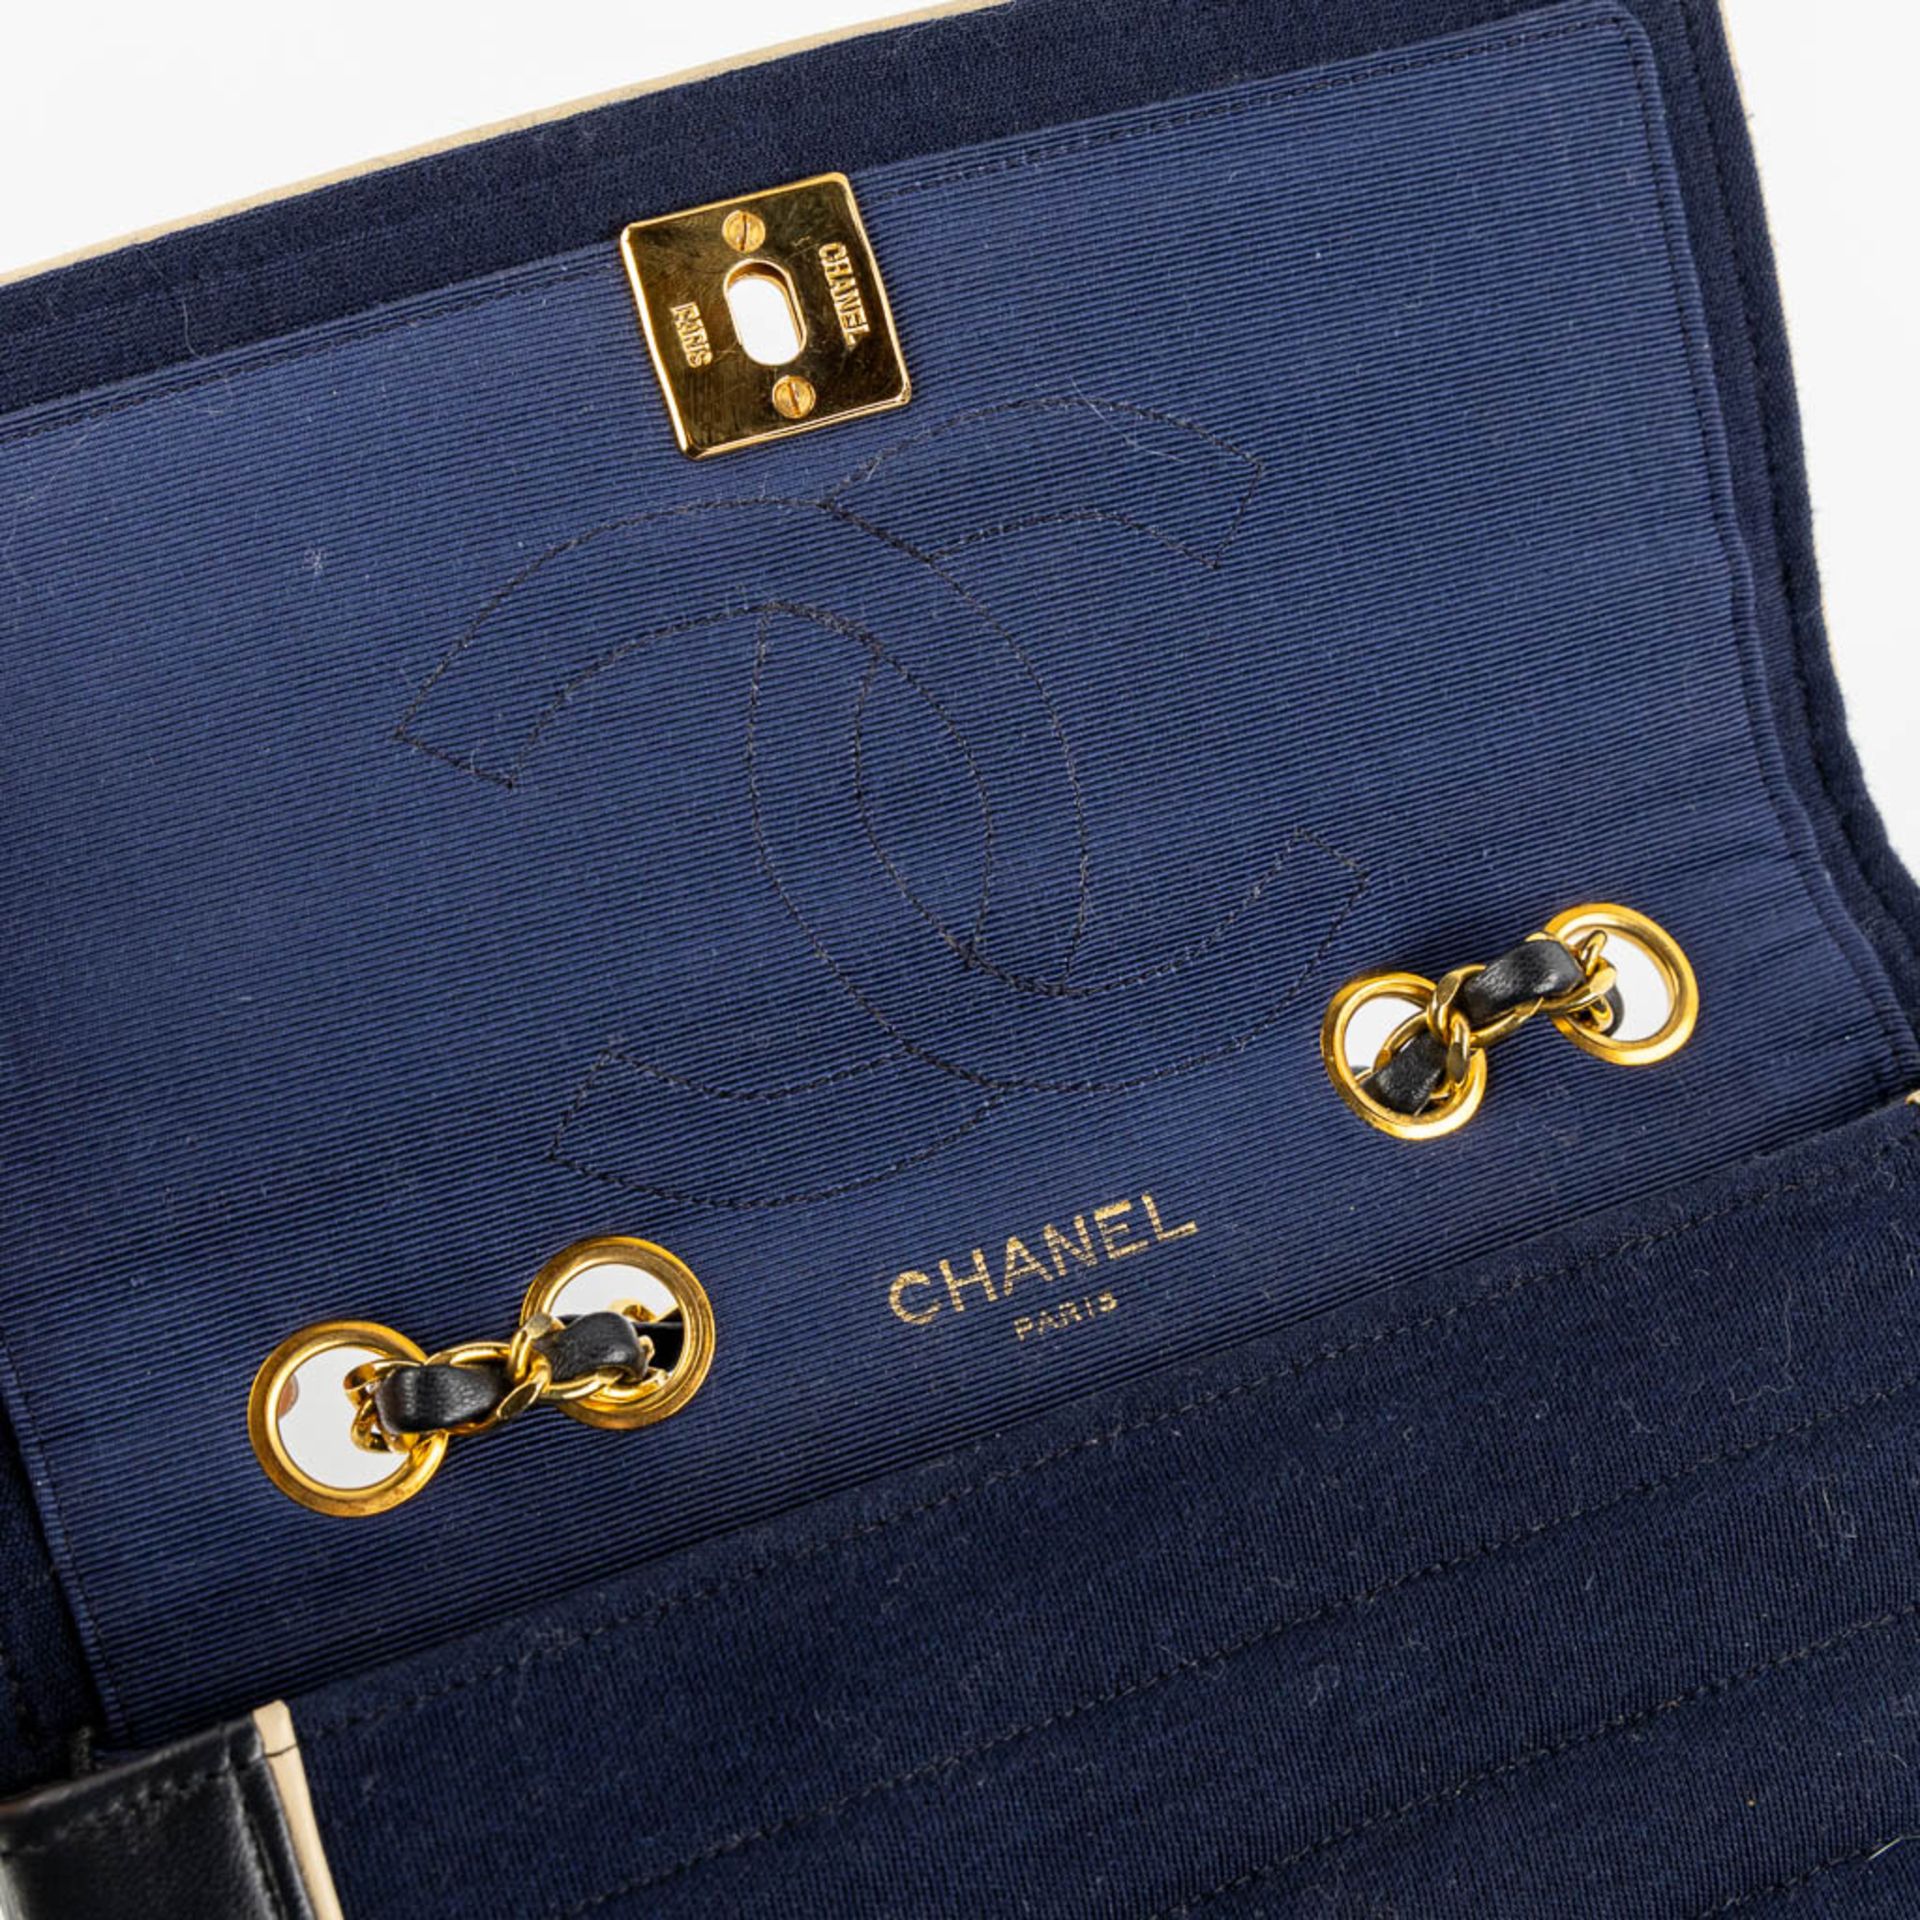 Chanel Classique, a woman's handbag, leather and fabrc. (W:24,5 x H:19 cm) - Image 14 of 17